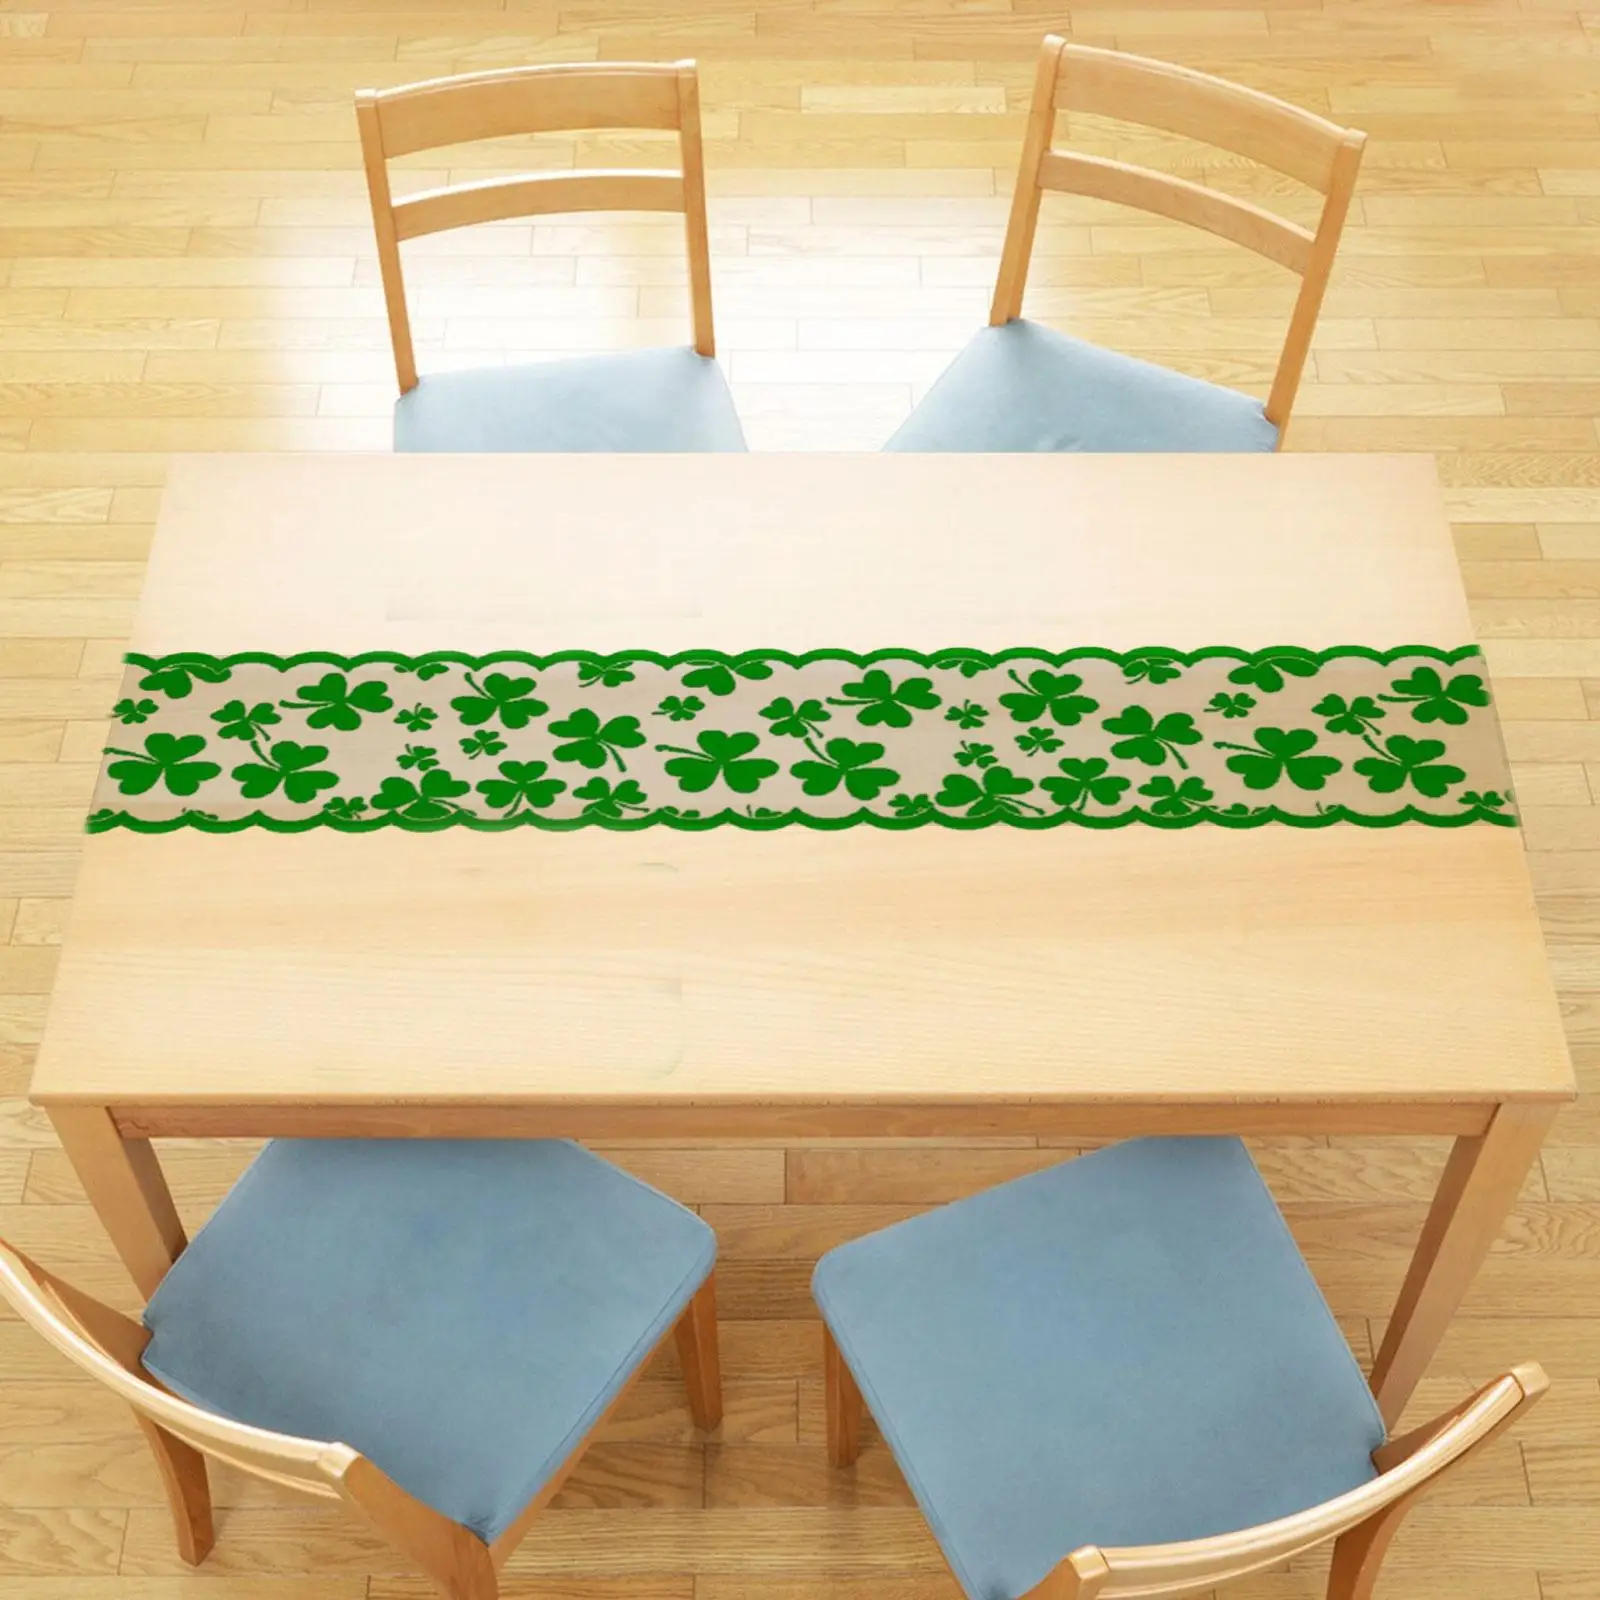 

ST Patricks Day Decor Durable Lace Rectangular Tabletop Runner Green Festival for Holiday Dinner Kitchen Home Hotel Dining Table